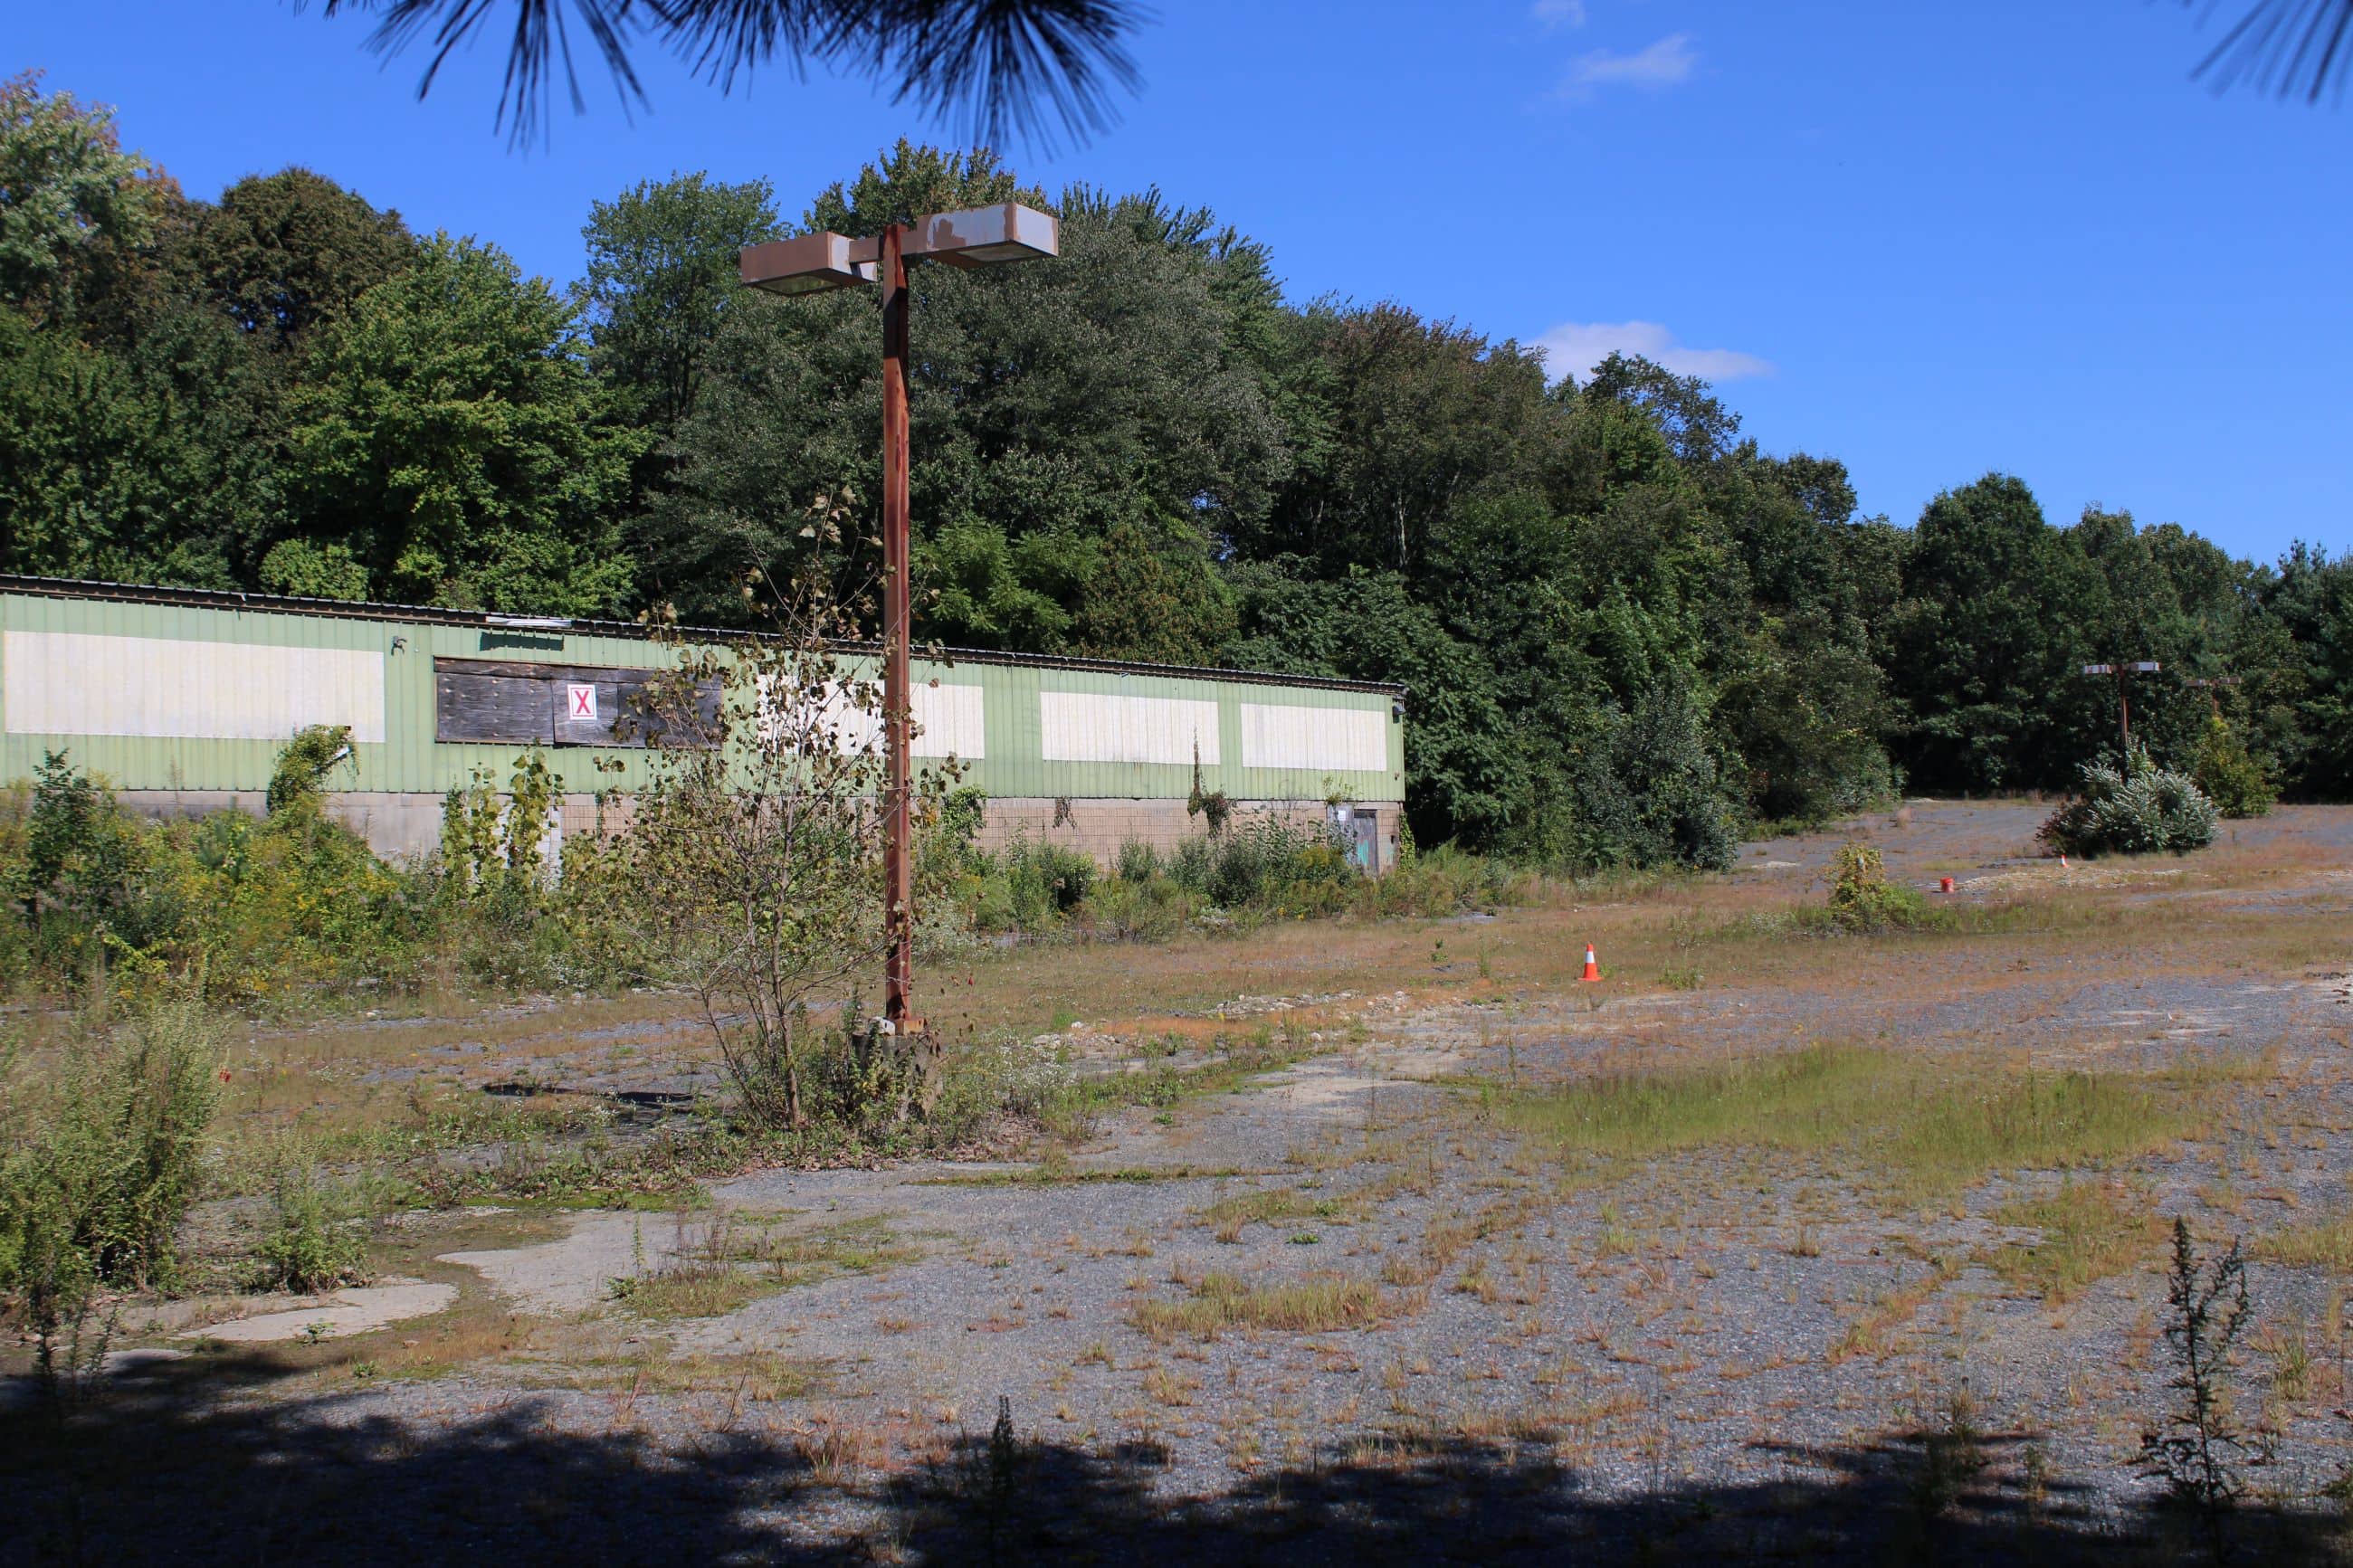 Planning Board approves special permit for former roller rink